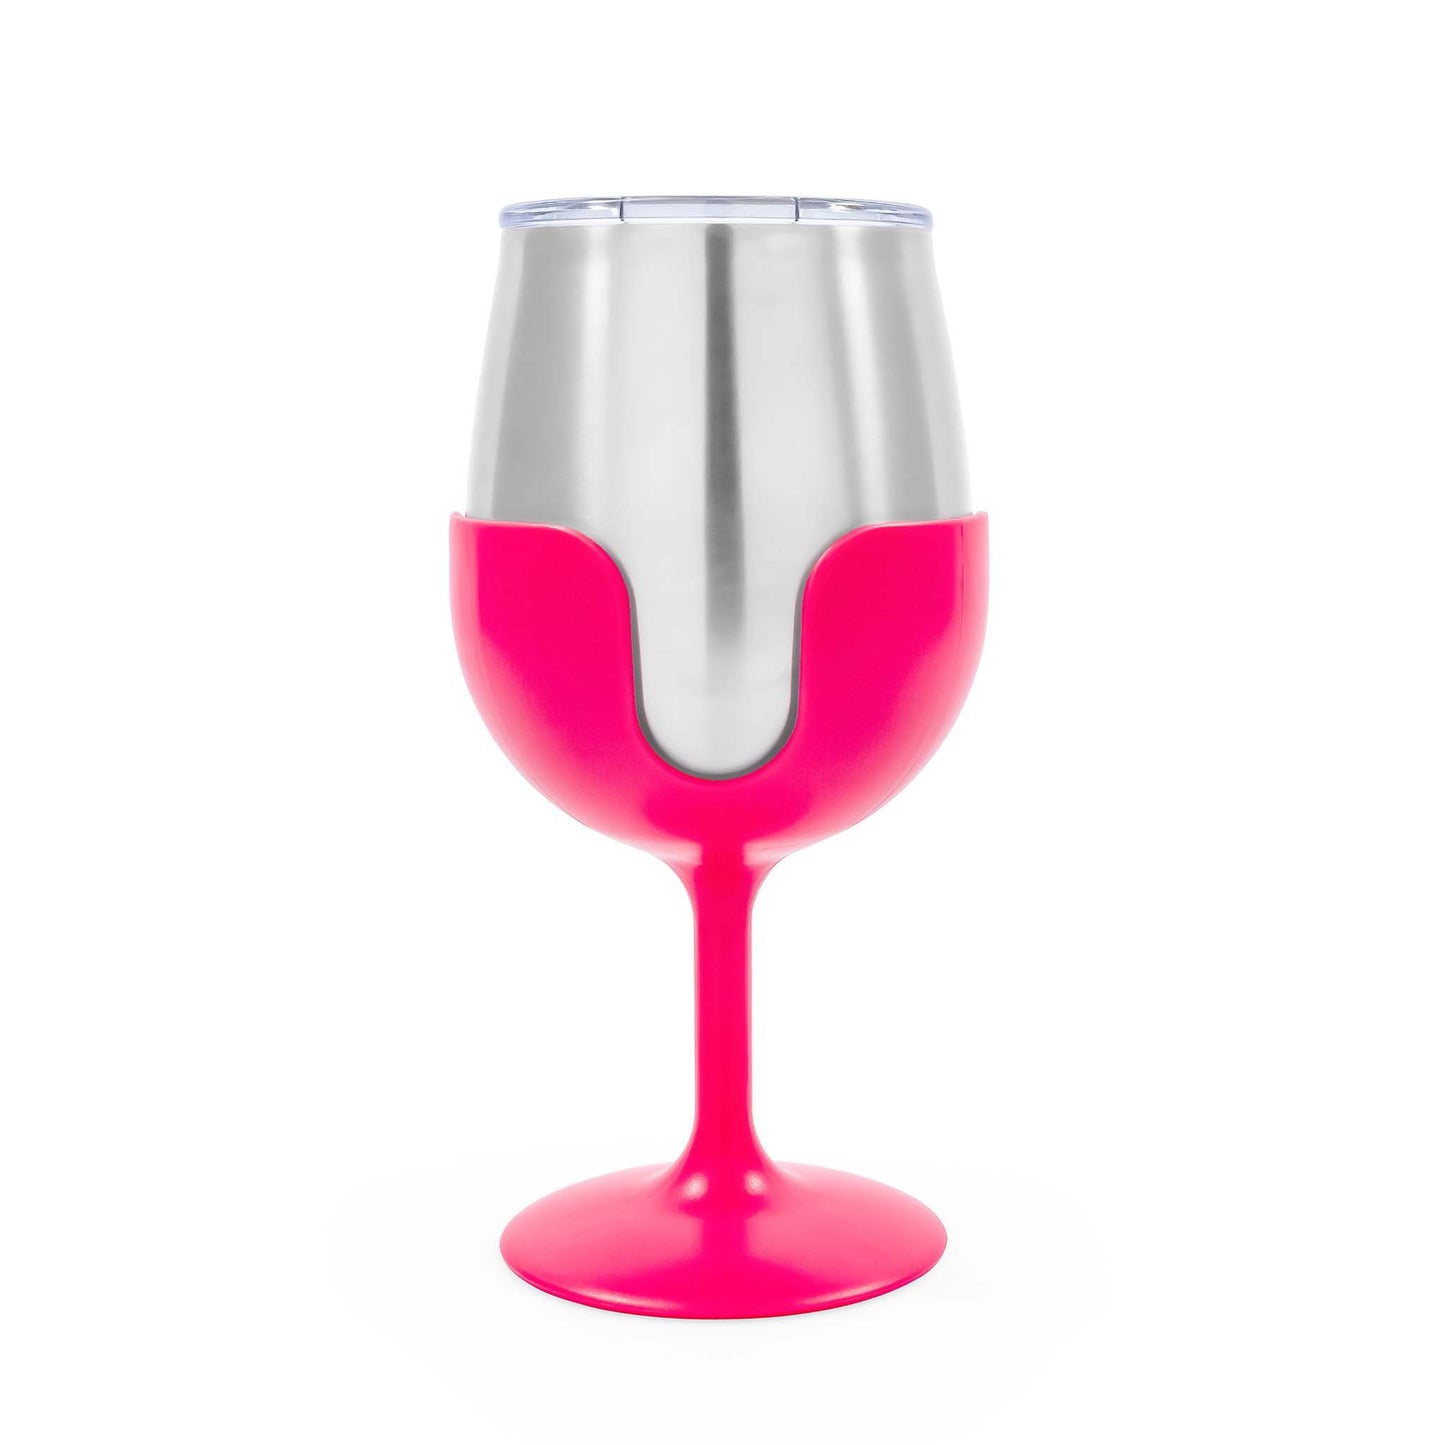 Life is Better at the Campsite Wine Tumbler Set (Blue / Pink)